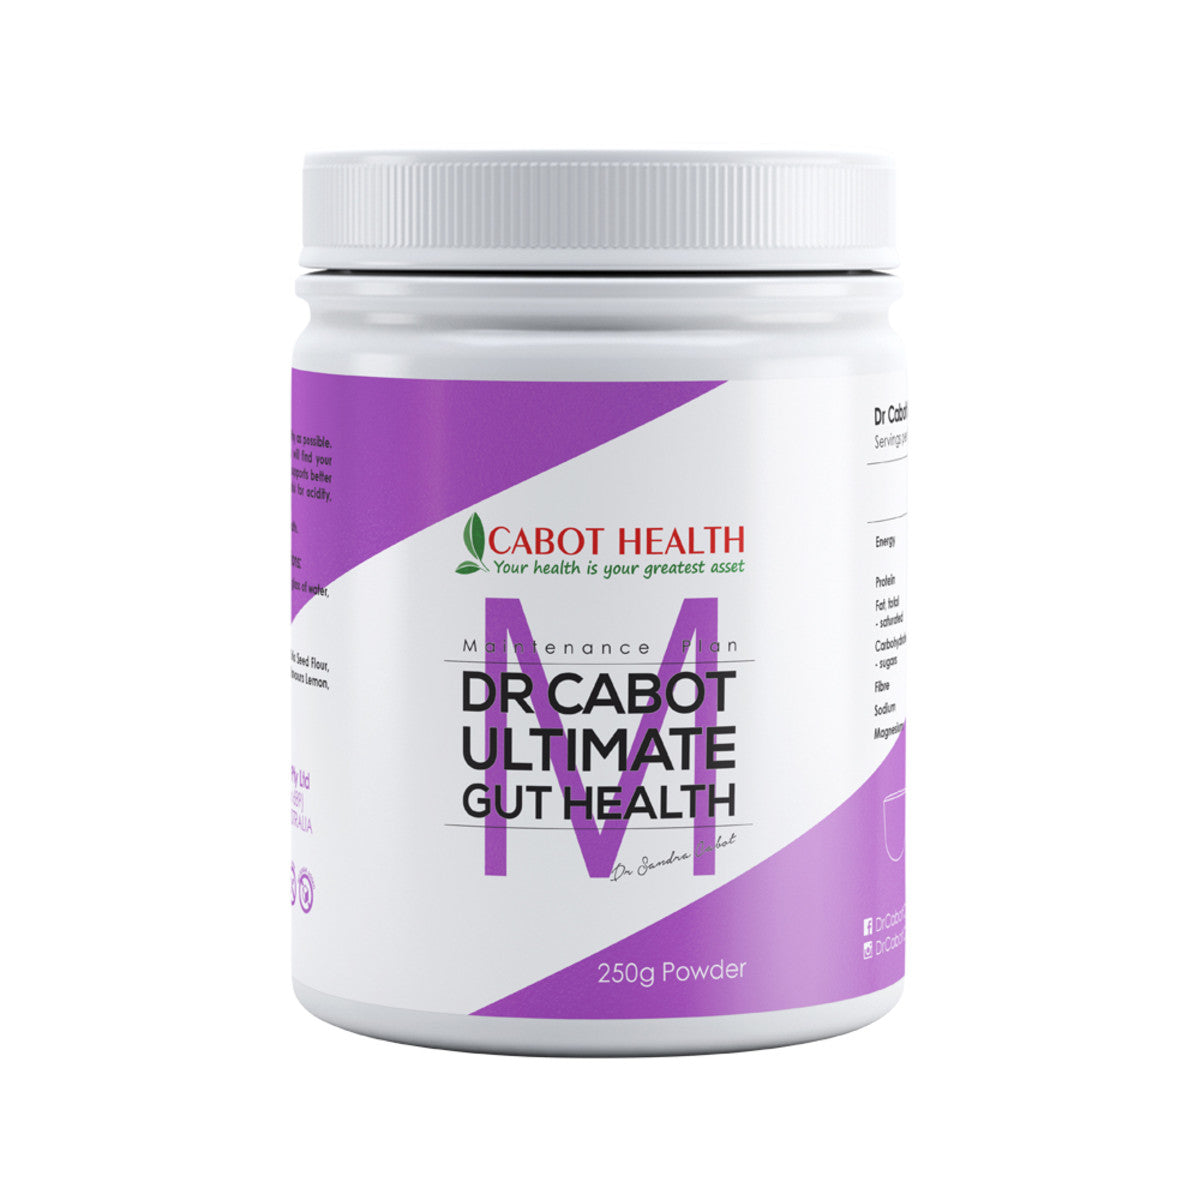 Cabot Health - Dr Cabot Ultimate Gut Health